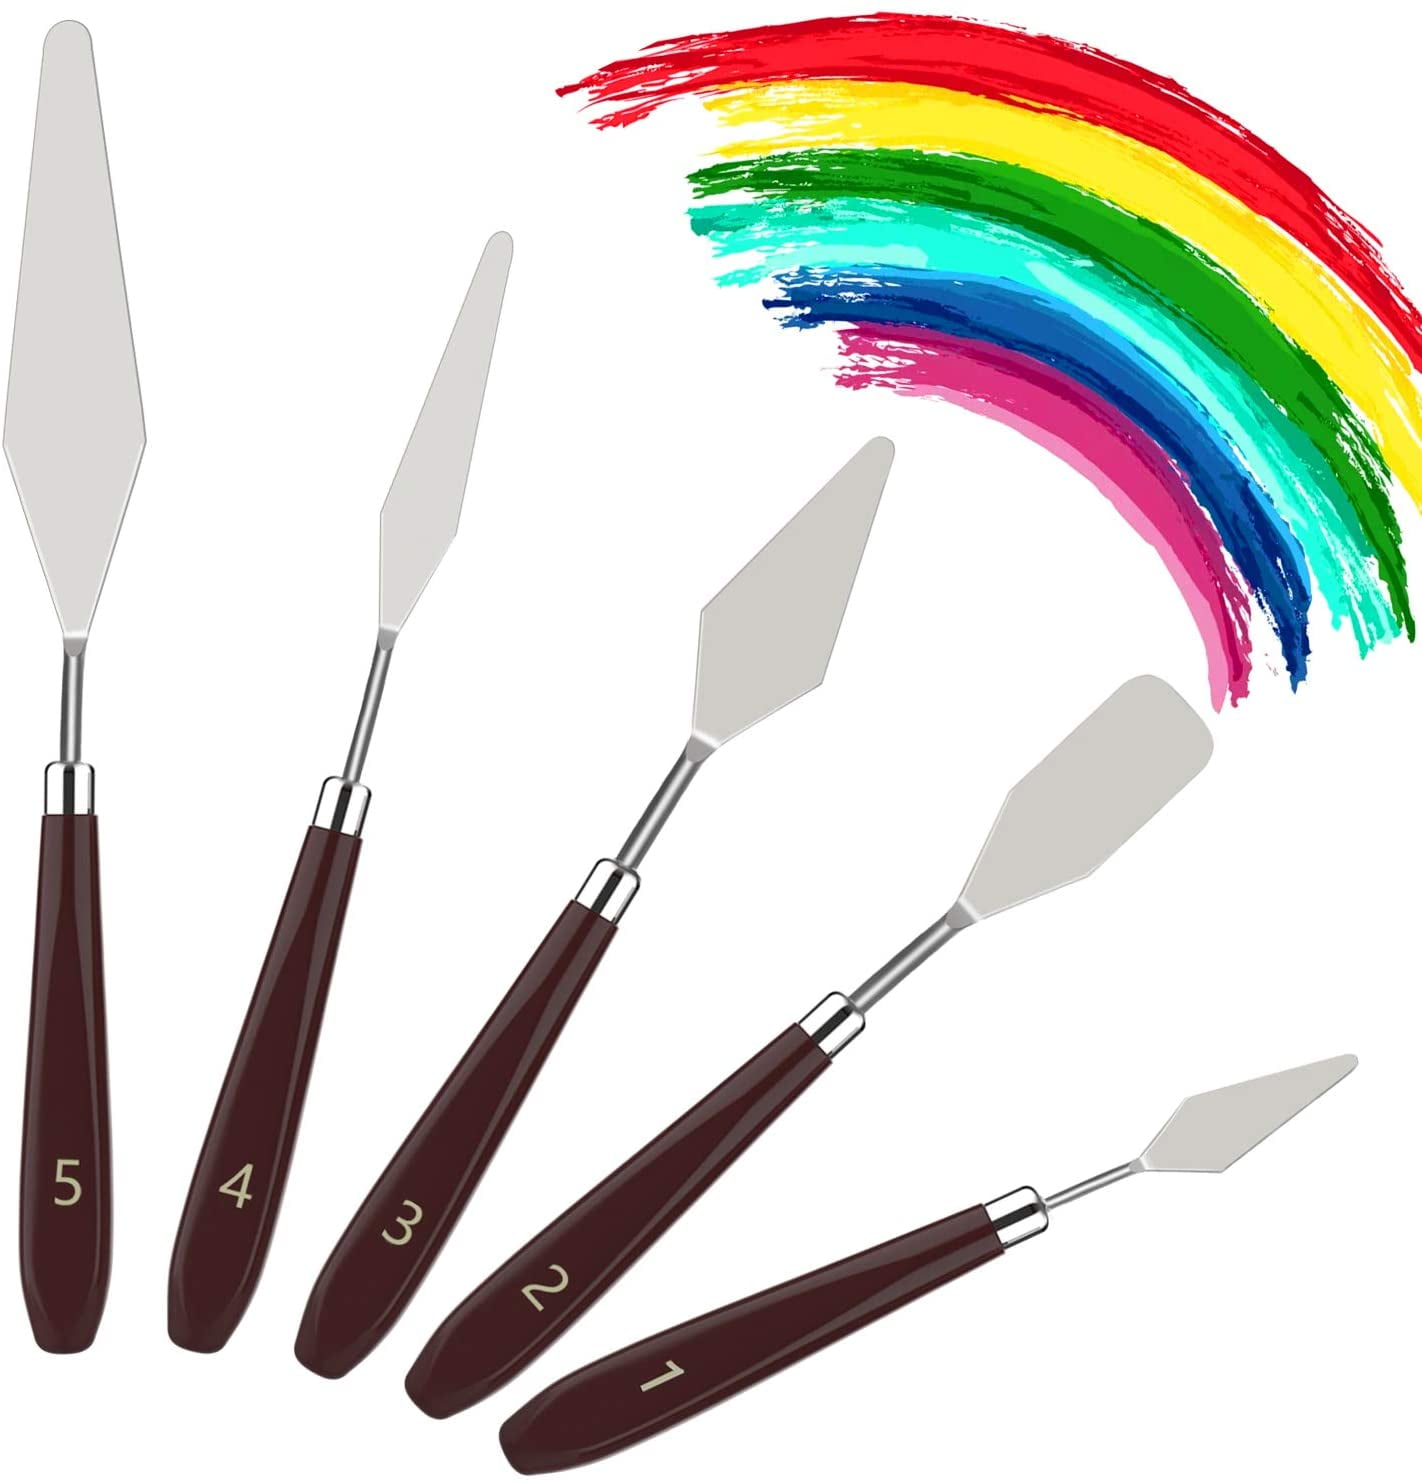 Manunclaims 5 Pieces Painting Knives Stainless Steel Spatula